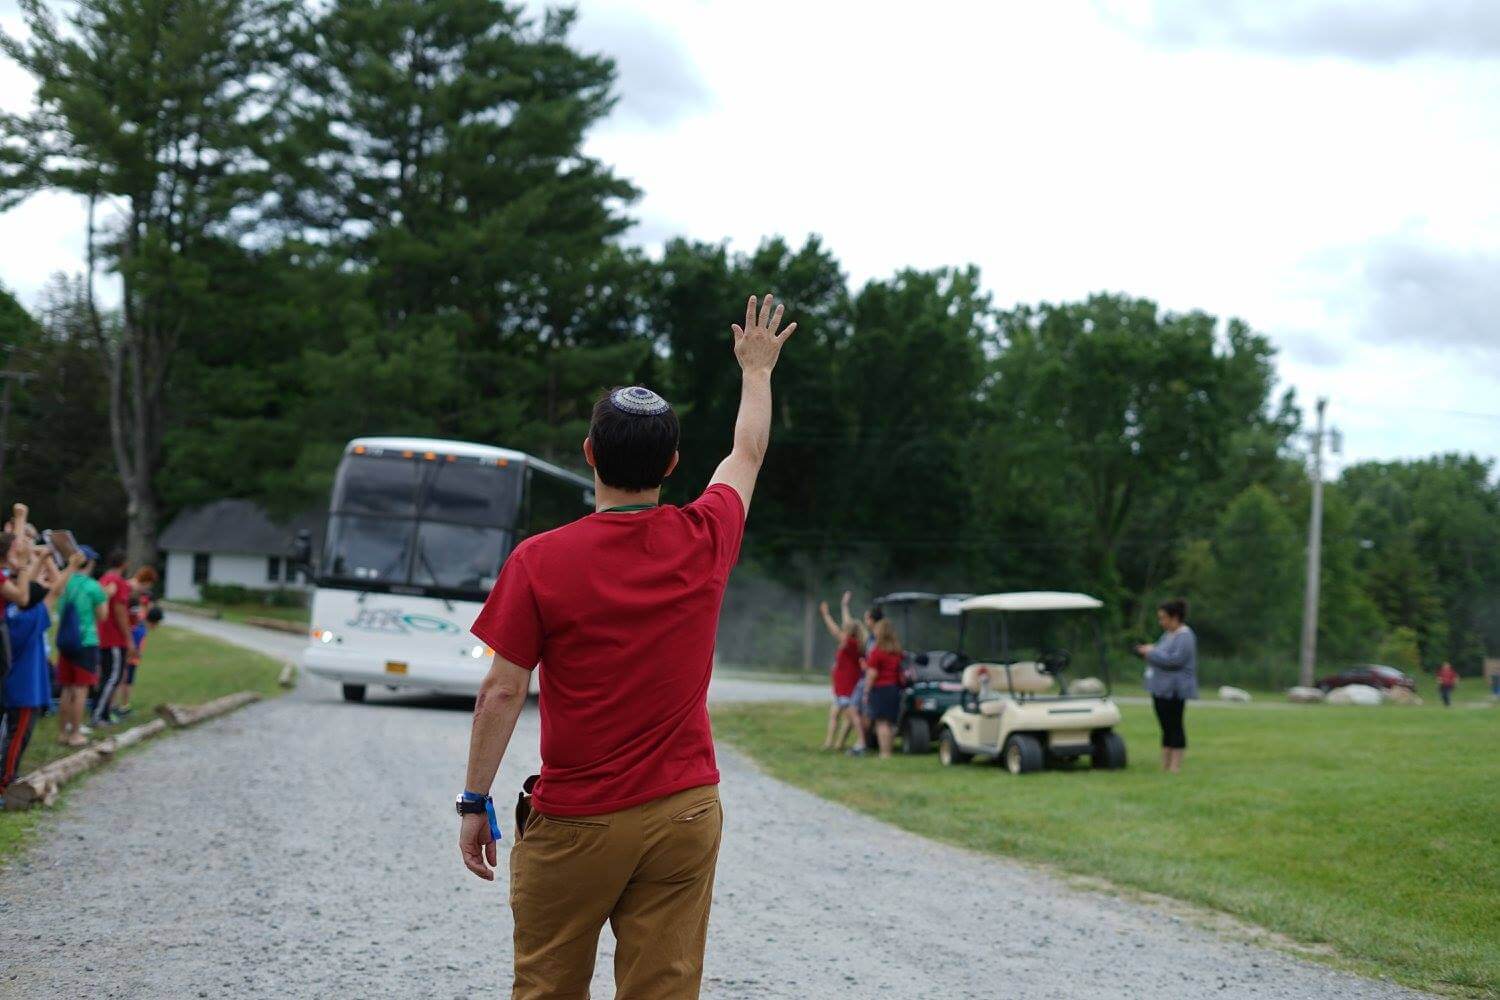 Rabbi Ethan Linden, pictured here welcoming campers to Ramah Berkshires in 2017, resigned as camp director before the institution settled a lawsuit alleging Linden and others mishandled a sexual assault report.